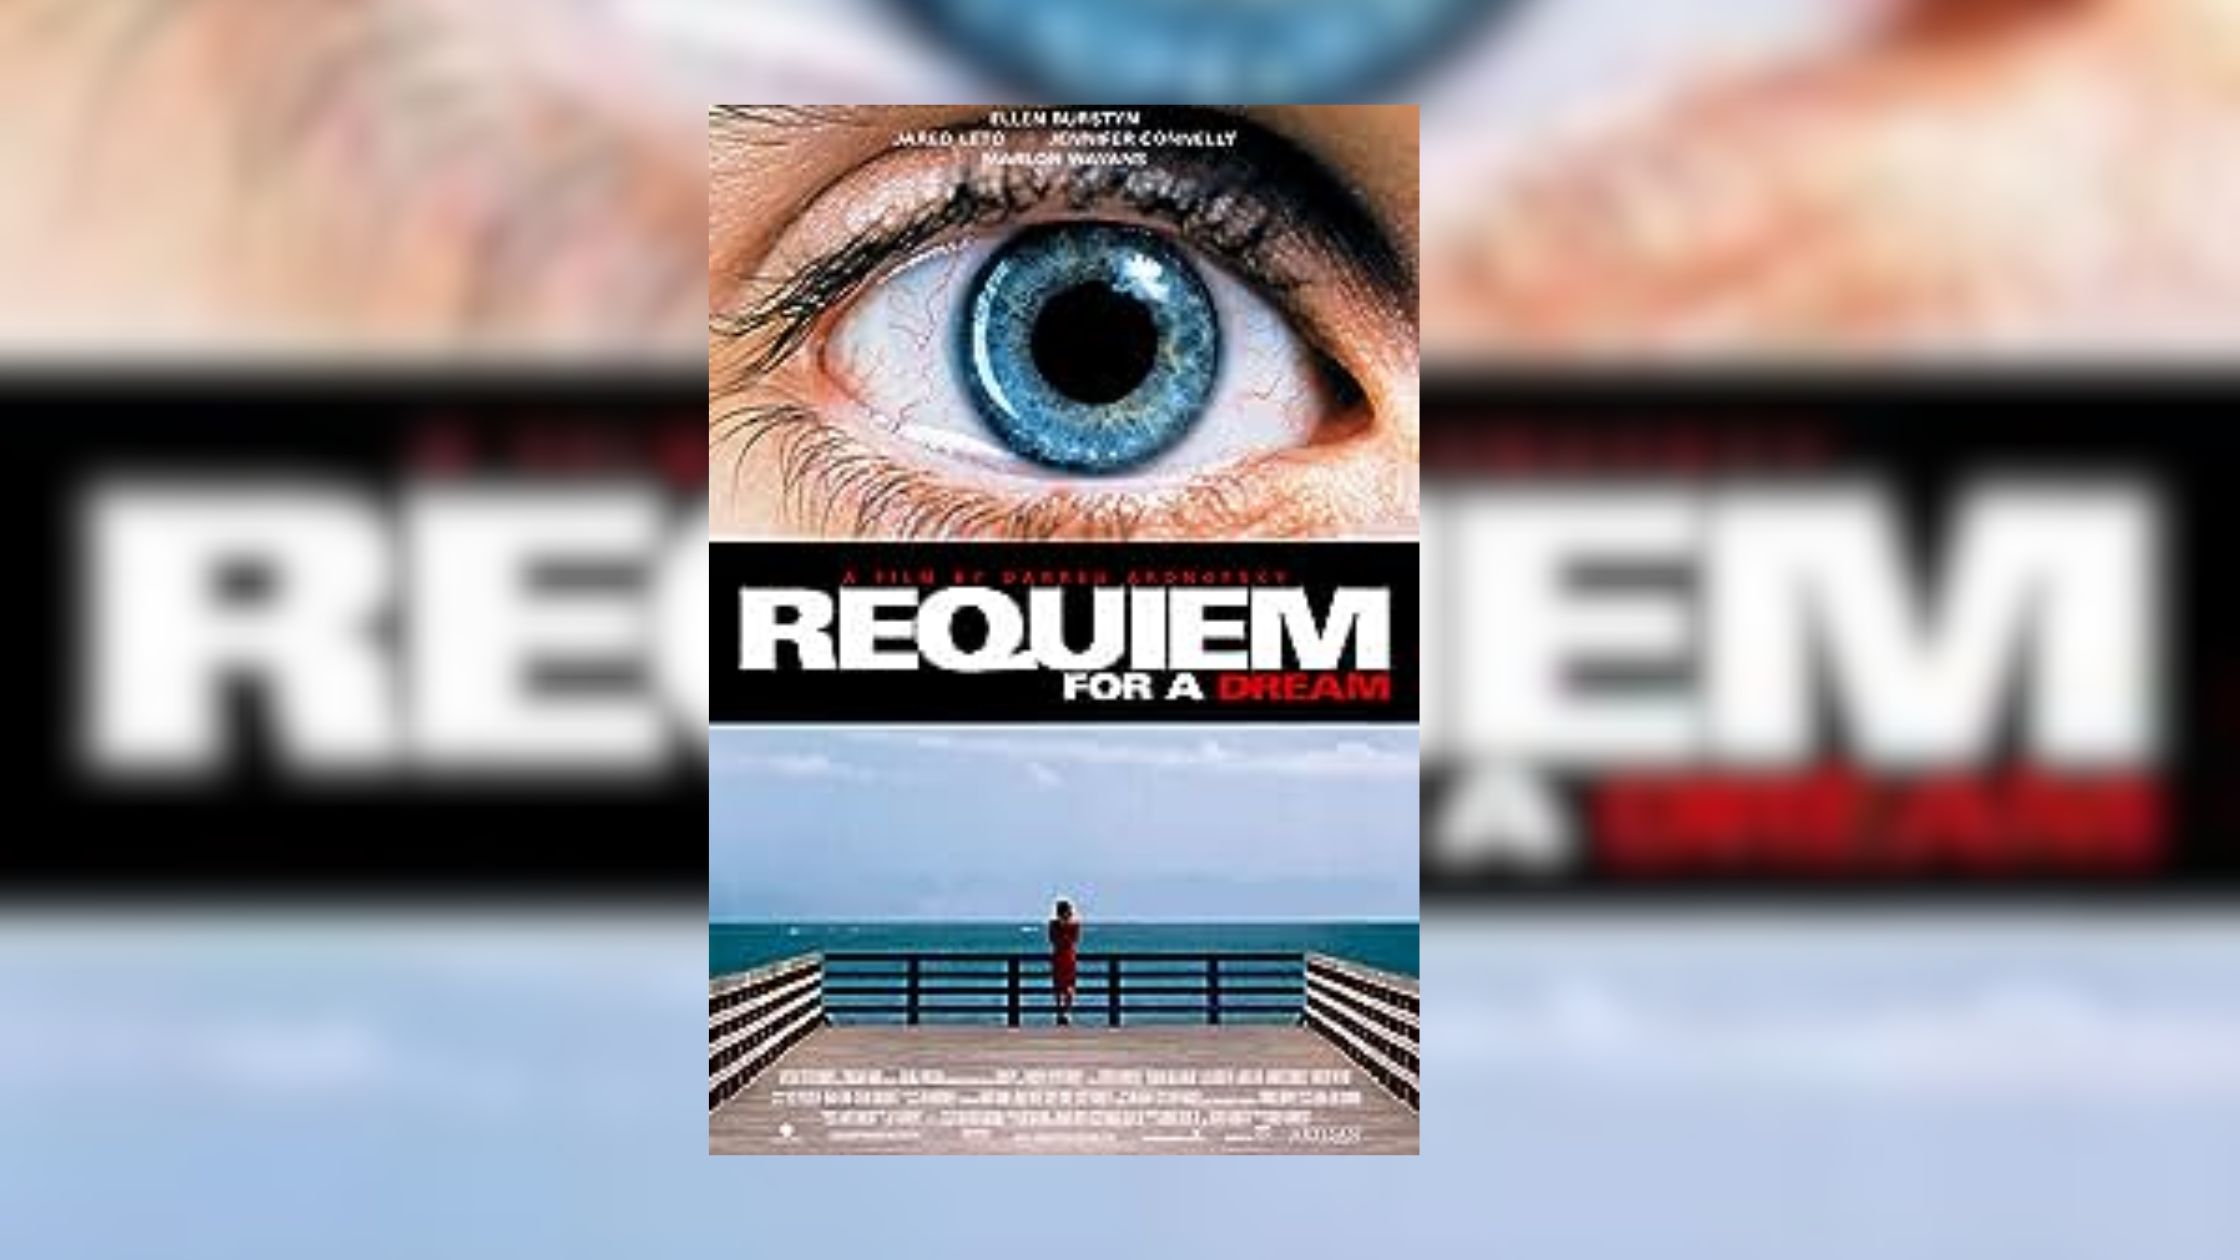 Poster from the film Requiem for a dream released in the year 2000.